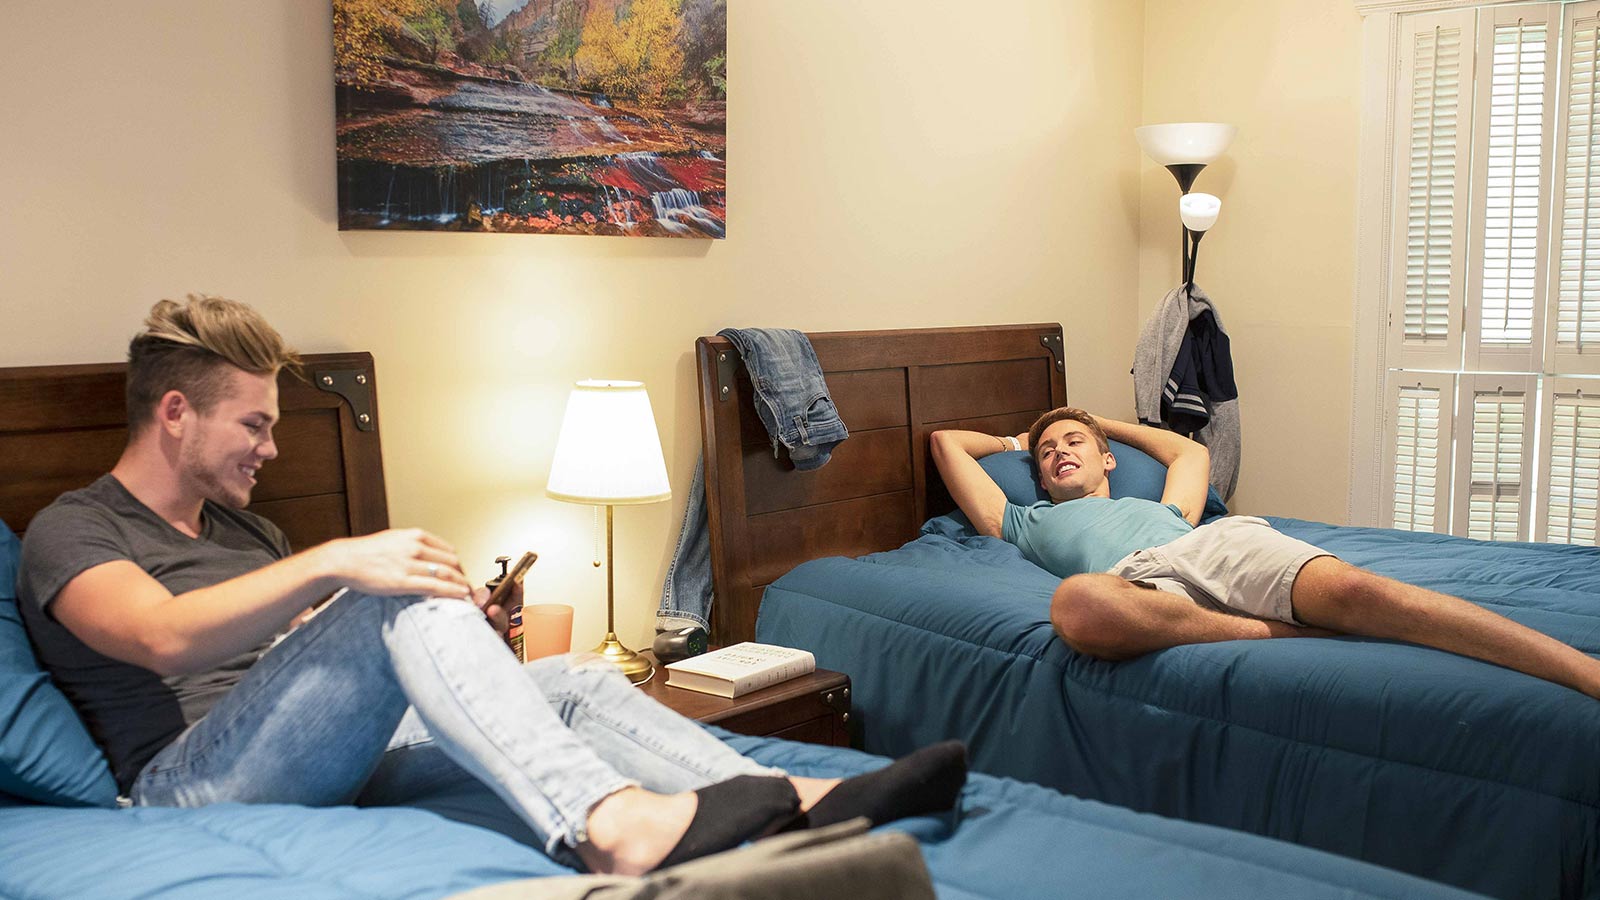 Two young men are relaxing in a bedroom with one lying on his back on a bed, looking at his phone, and the other sitting with crossed legs on another bed, smiling while looking at his phone.